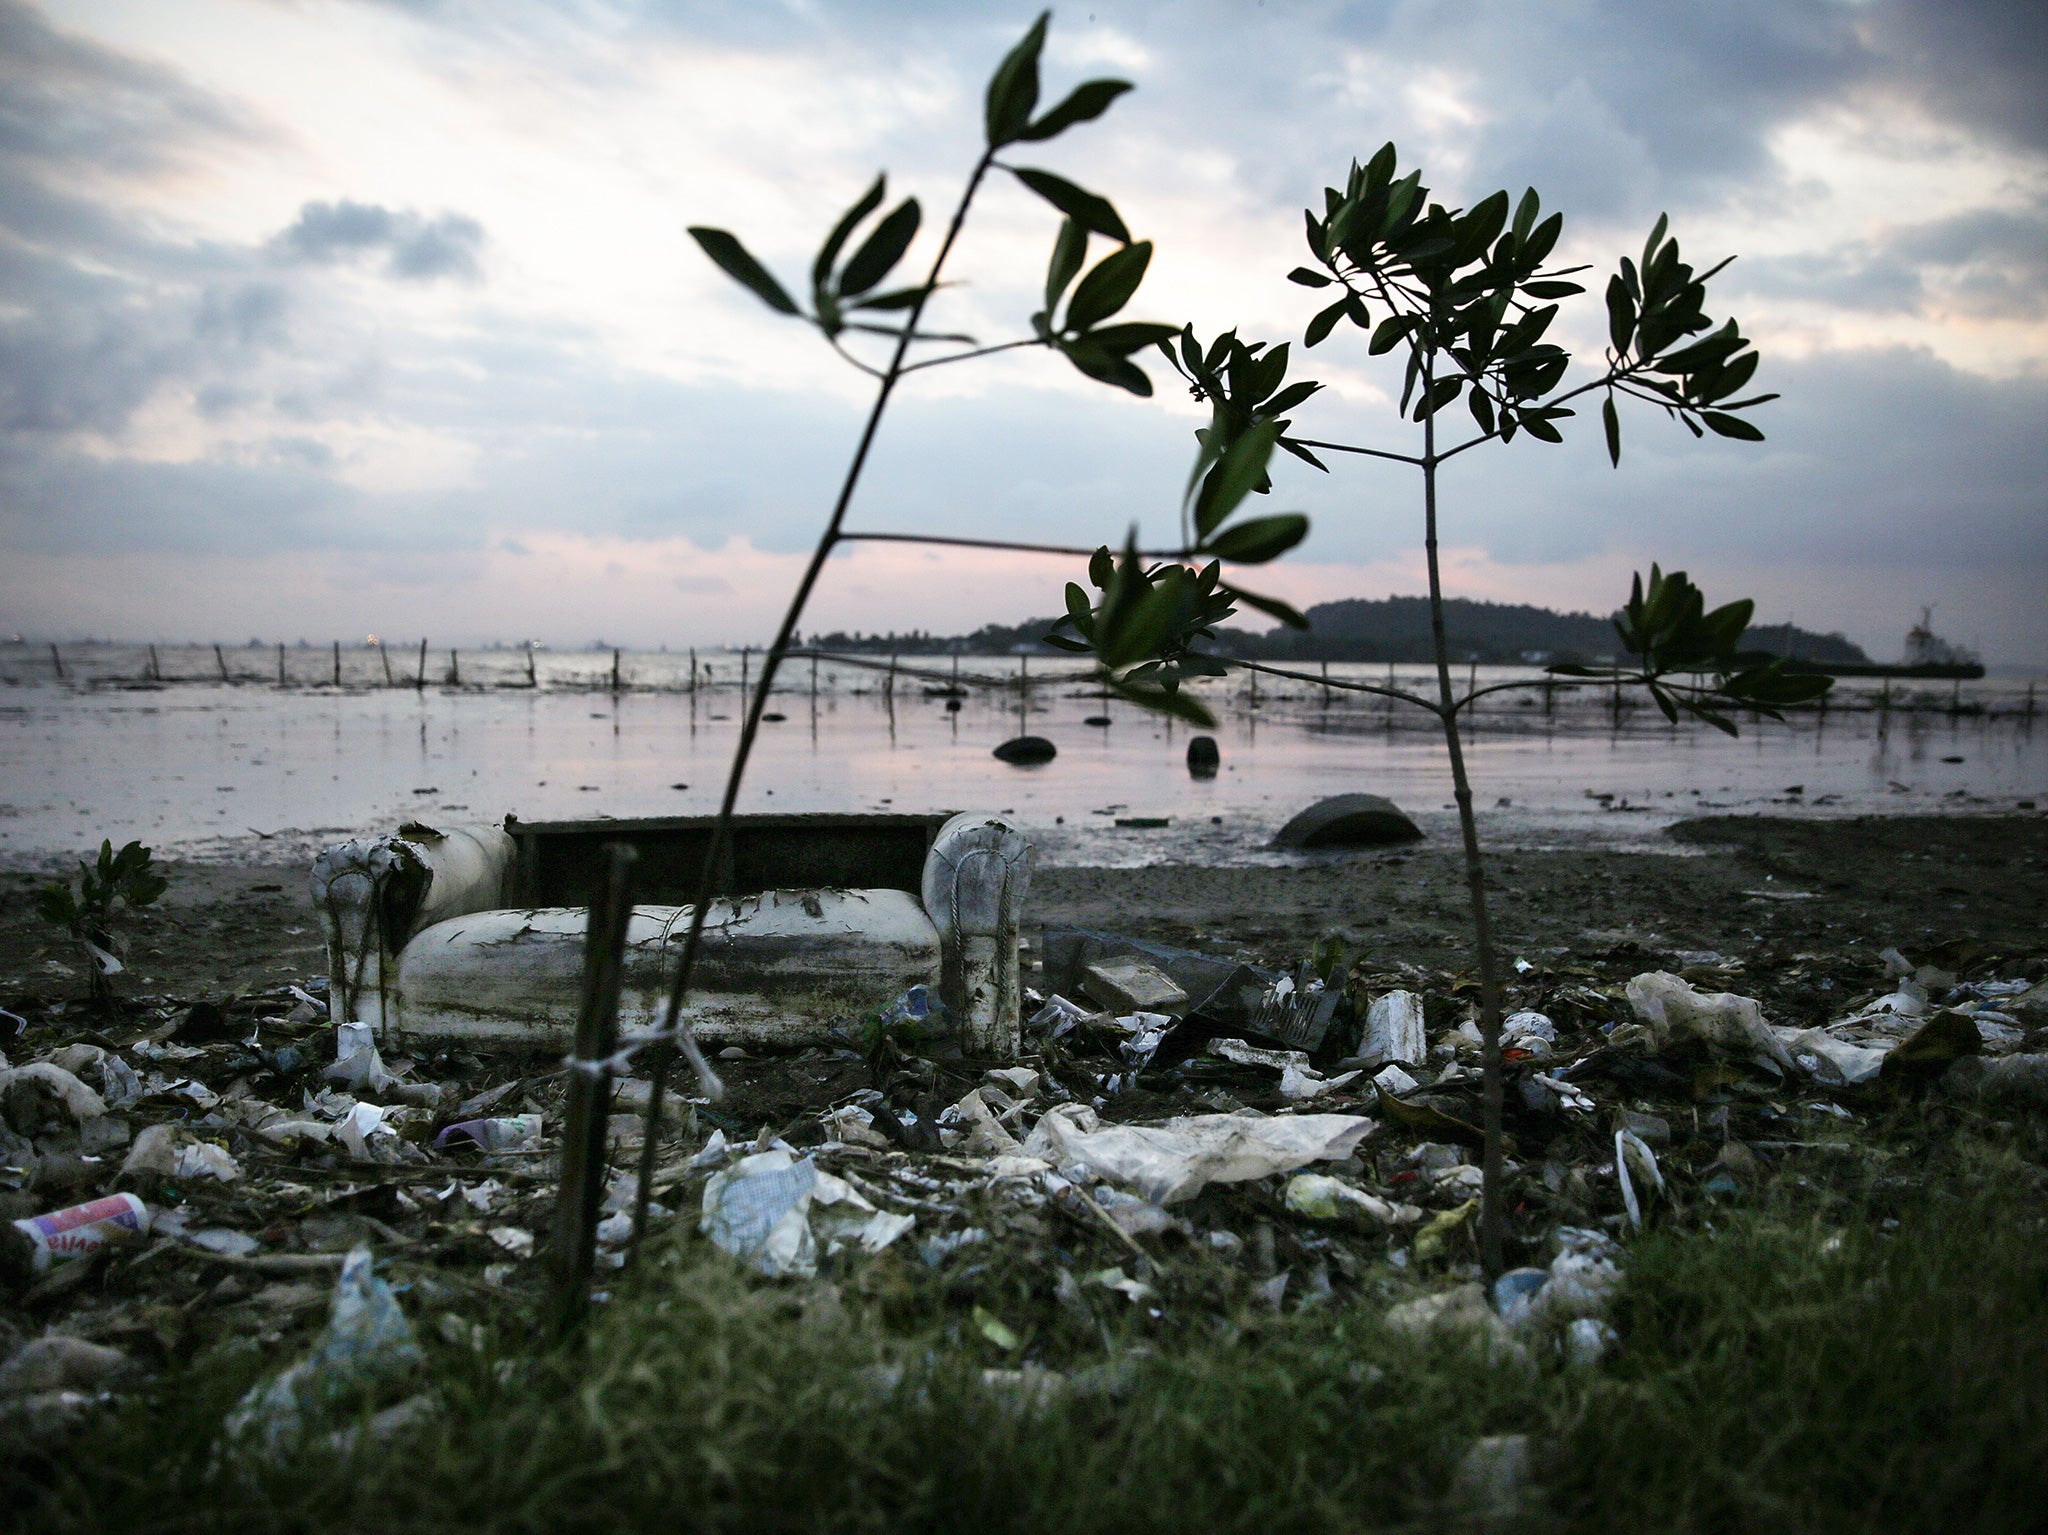 Pollution rests among pollution along the edge of Guanabara Bay, the venue for the Olympic sailing